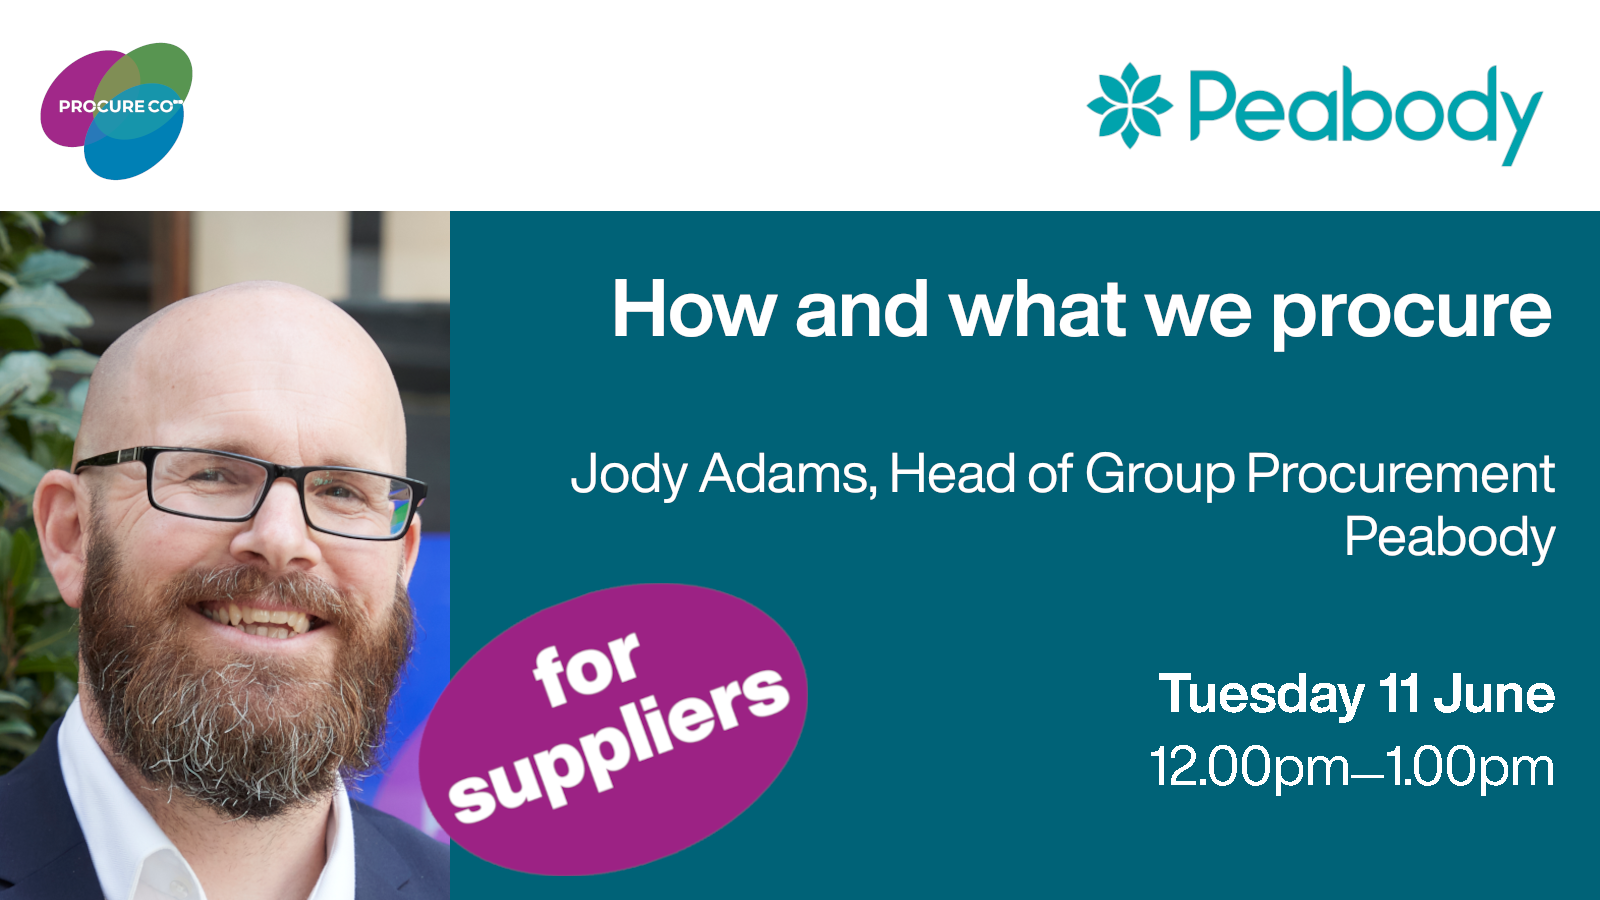 Jody Adams, Head of Group Procurement at Peabody, on 'How and what we procure'